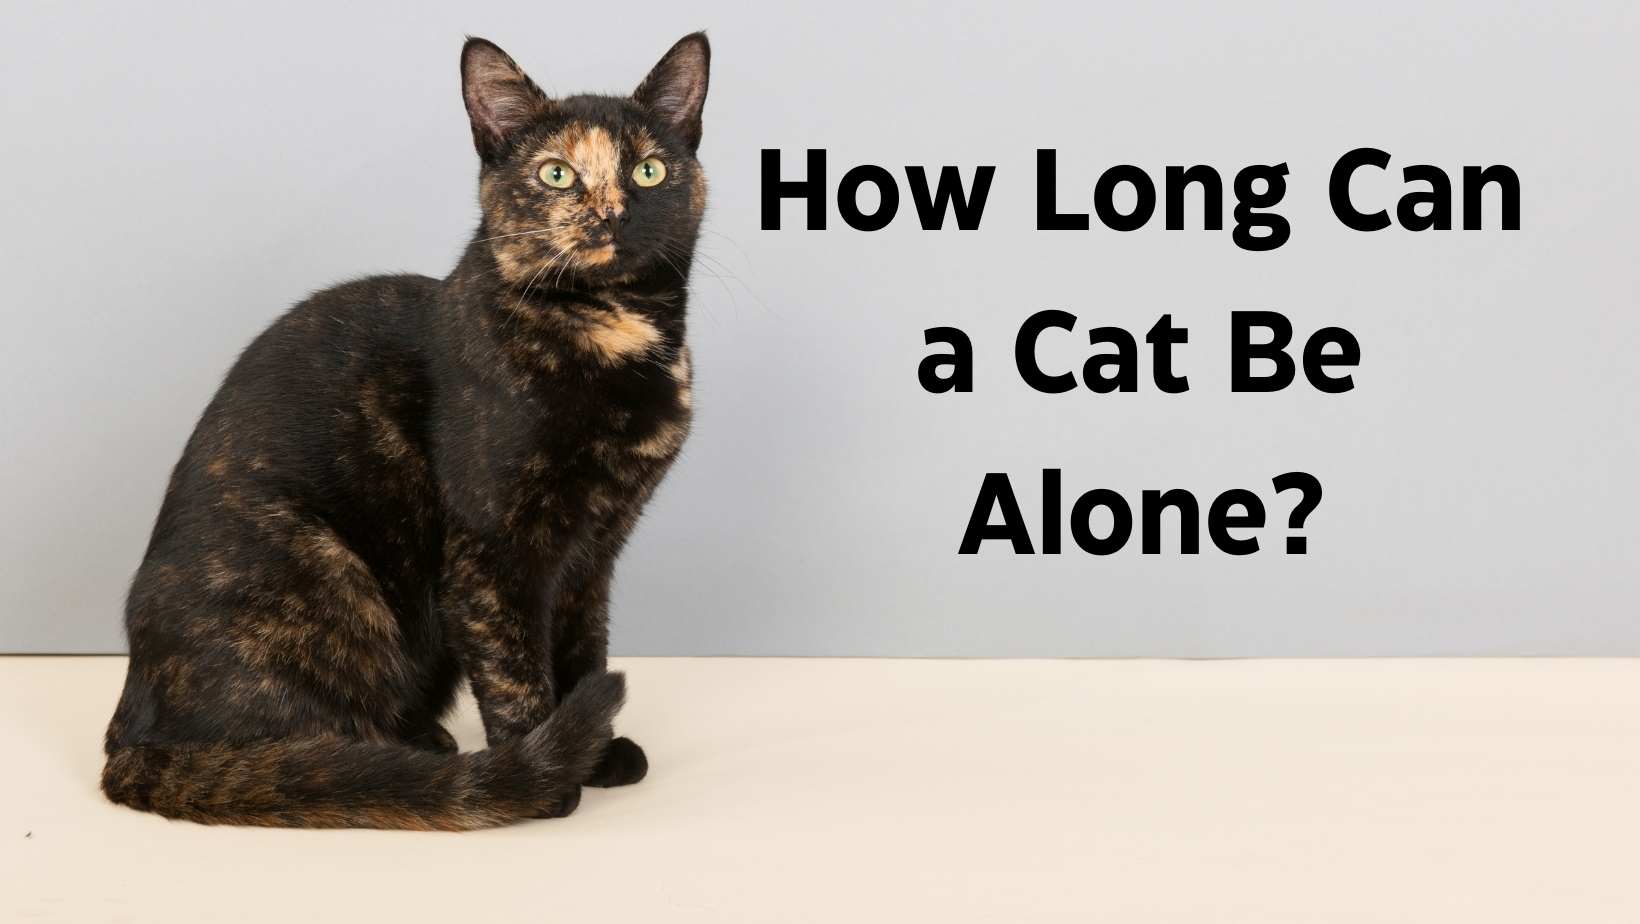 How Long Can a Cat Be Alone?